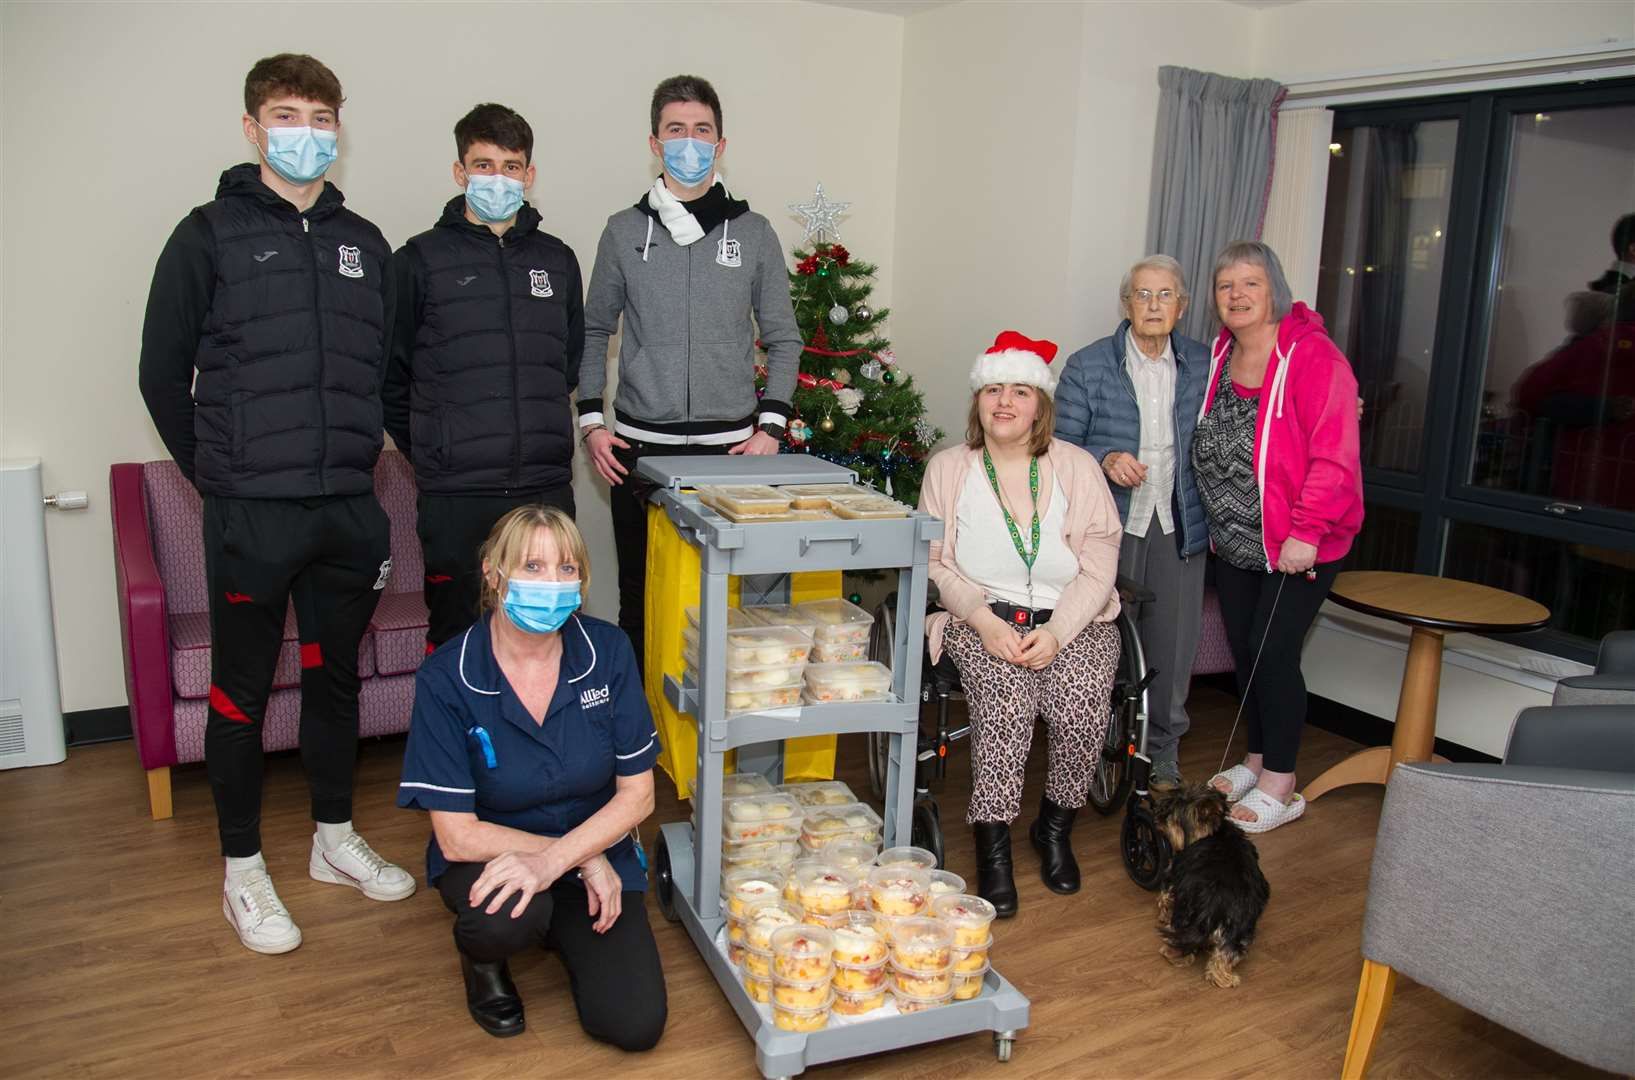 From left Fin Allen, Rory McEwan and Keiran Carty from Elgin City with Anne, Cherry and Pauline from Loxa Court with Team Leader Joanne (front). Picture: Becky Saunderson